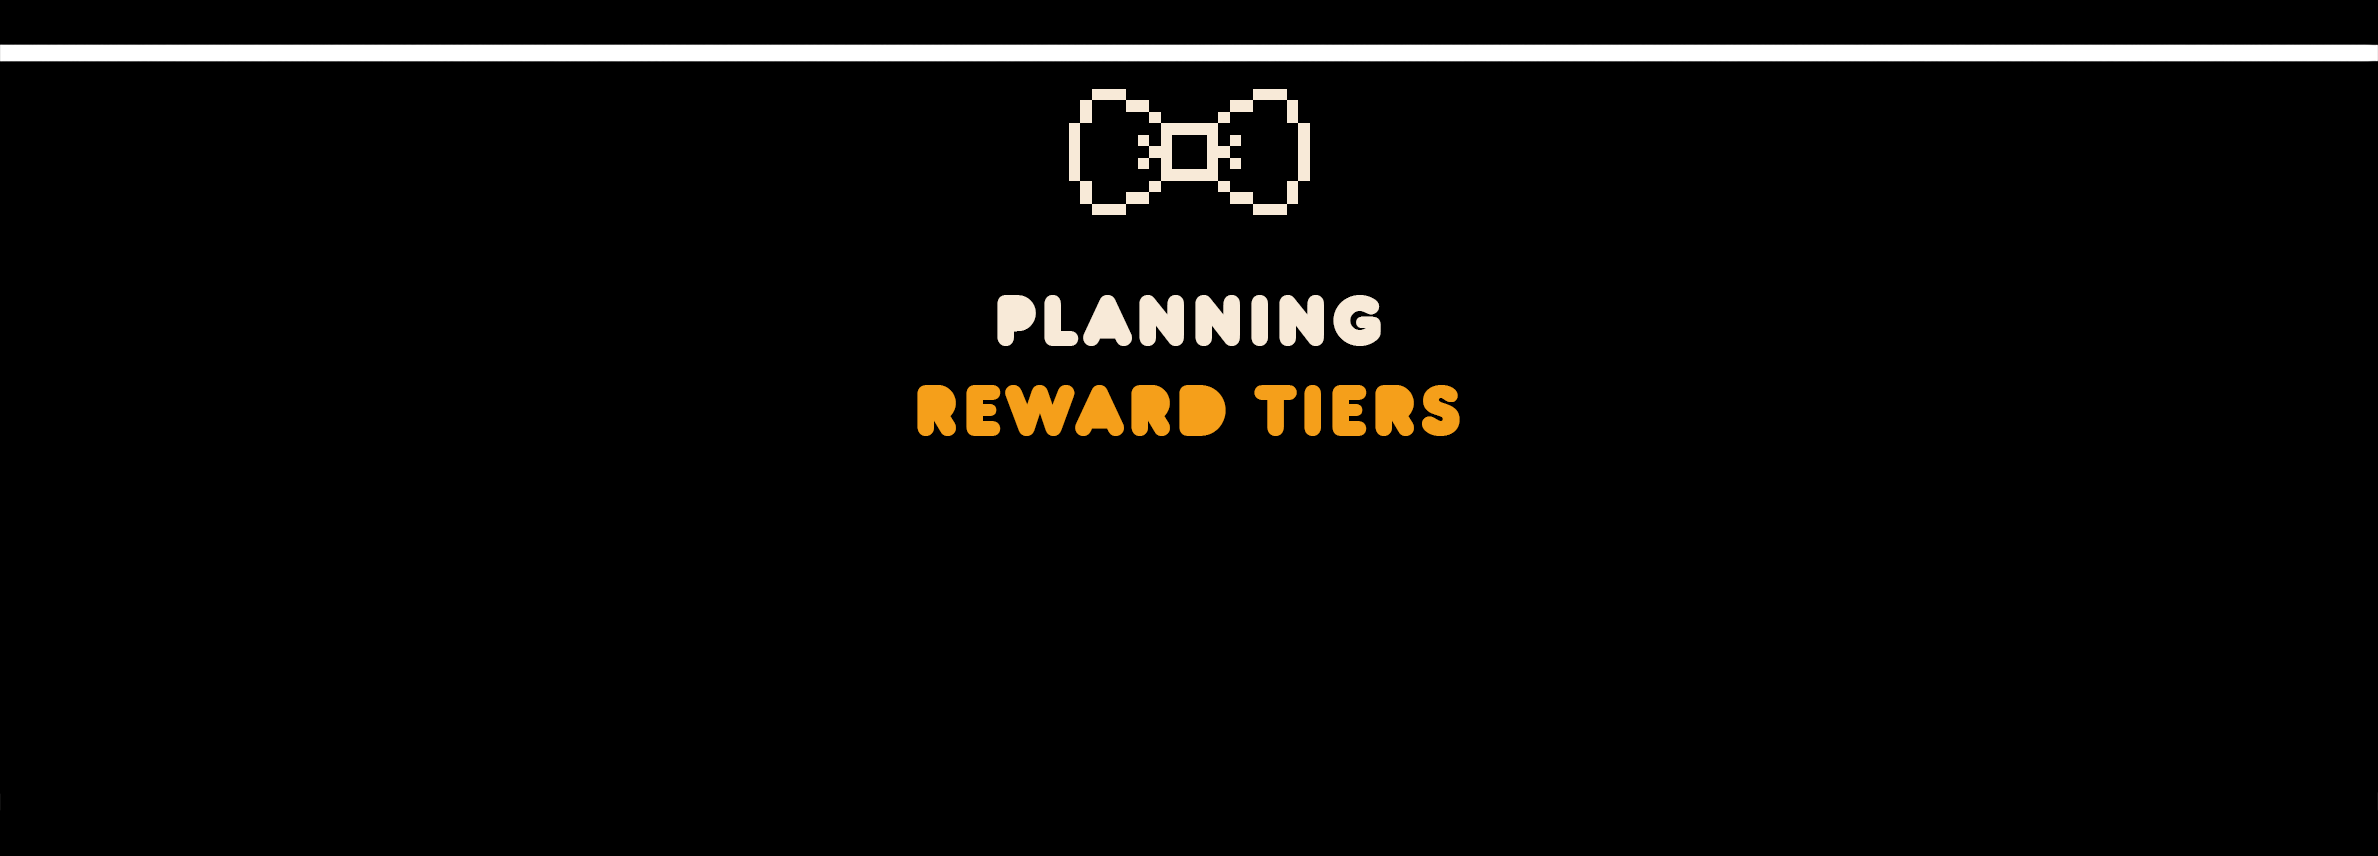 Article cover image for "How to Plan Reward Tiers on Kickstarter"